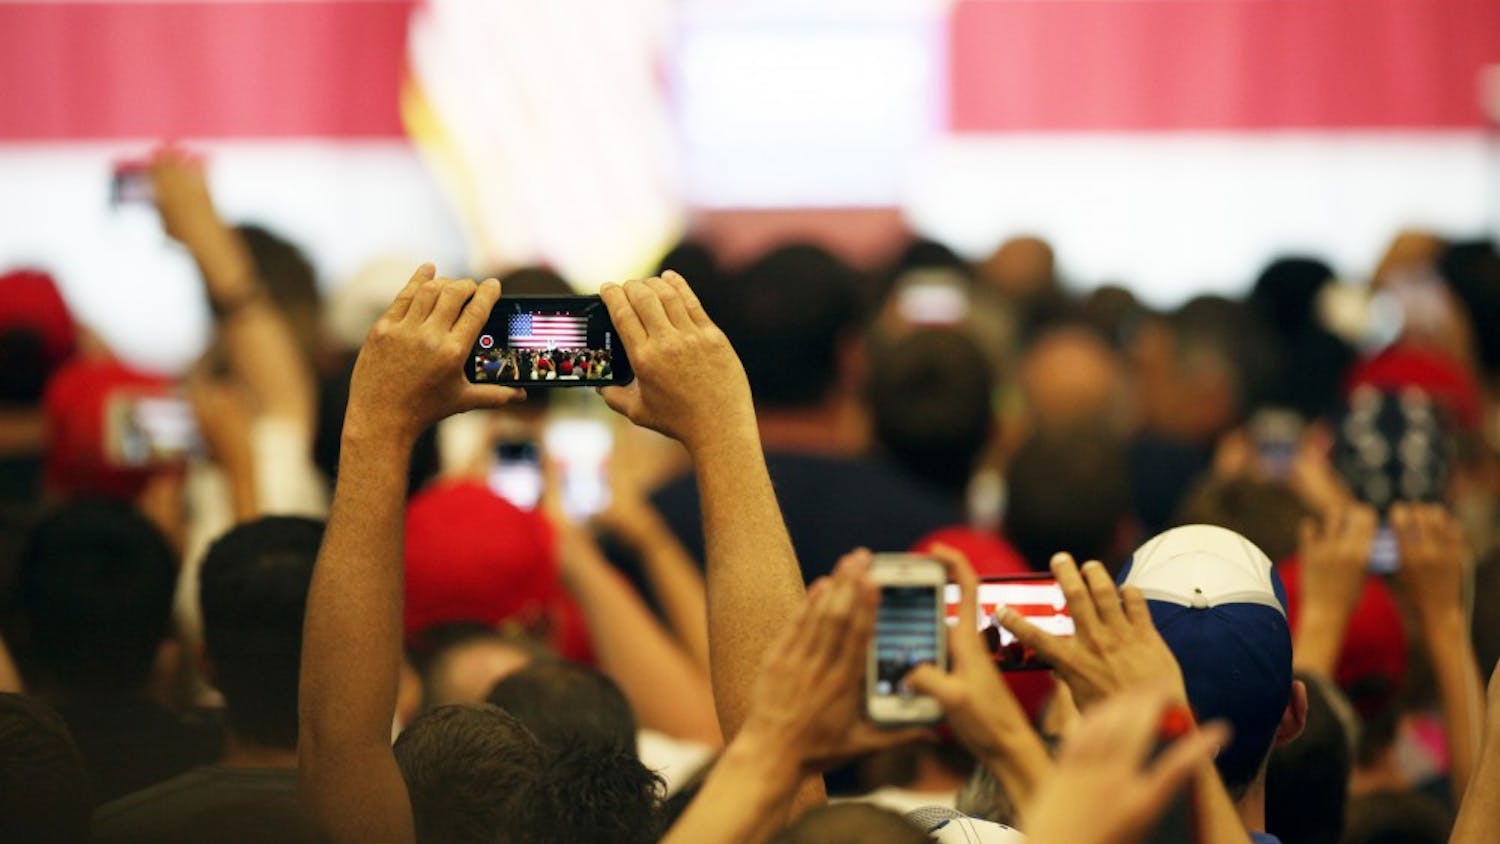 An audience member takes a picture as Donald Trump, republican presidential candidate, speak during a Trump rally in Westfield, Ind. on Tuesday evening.